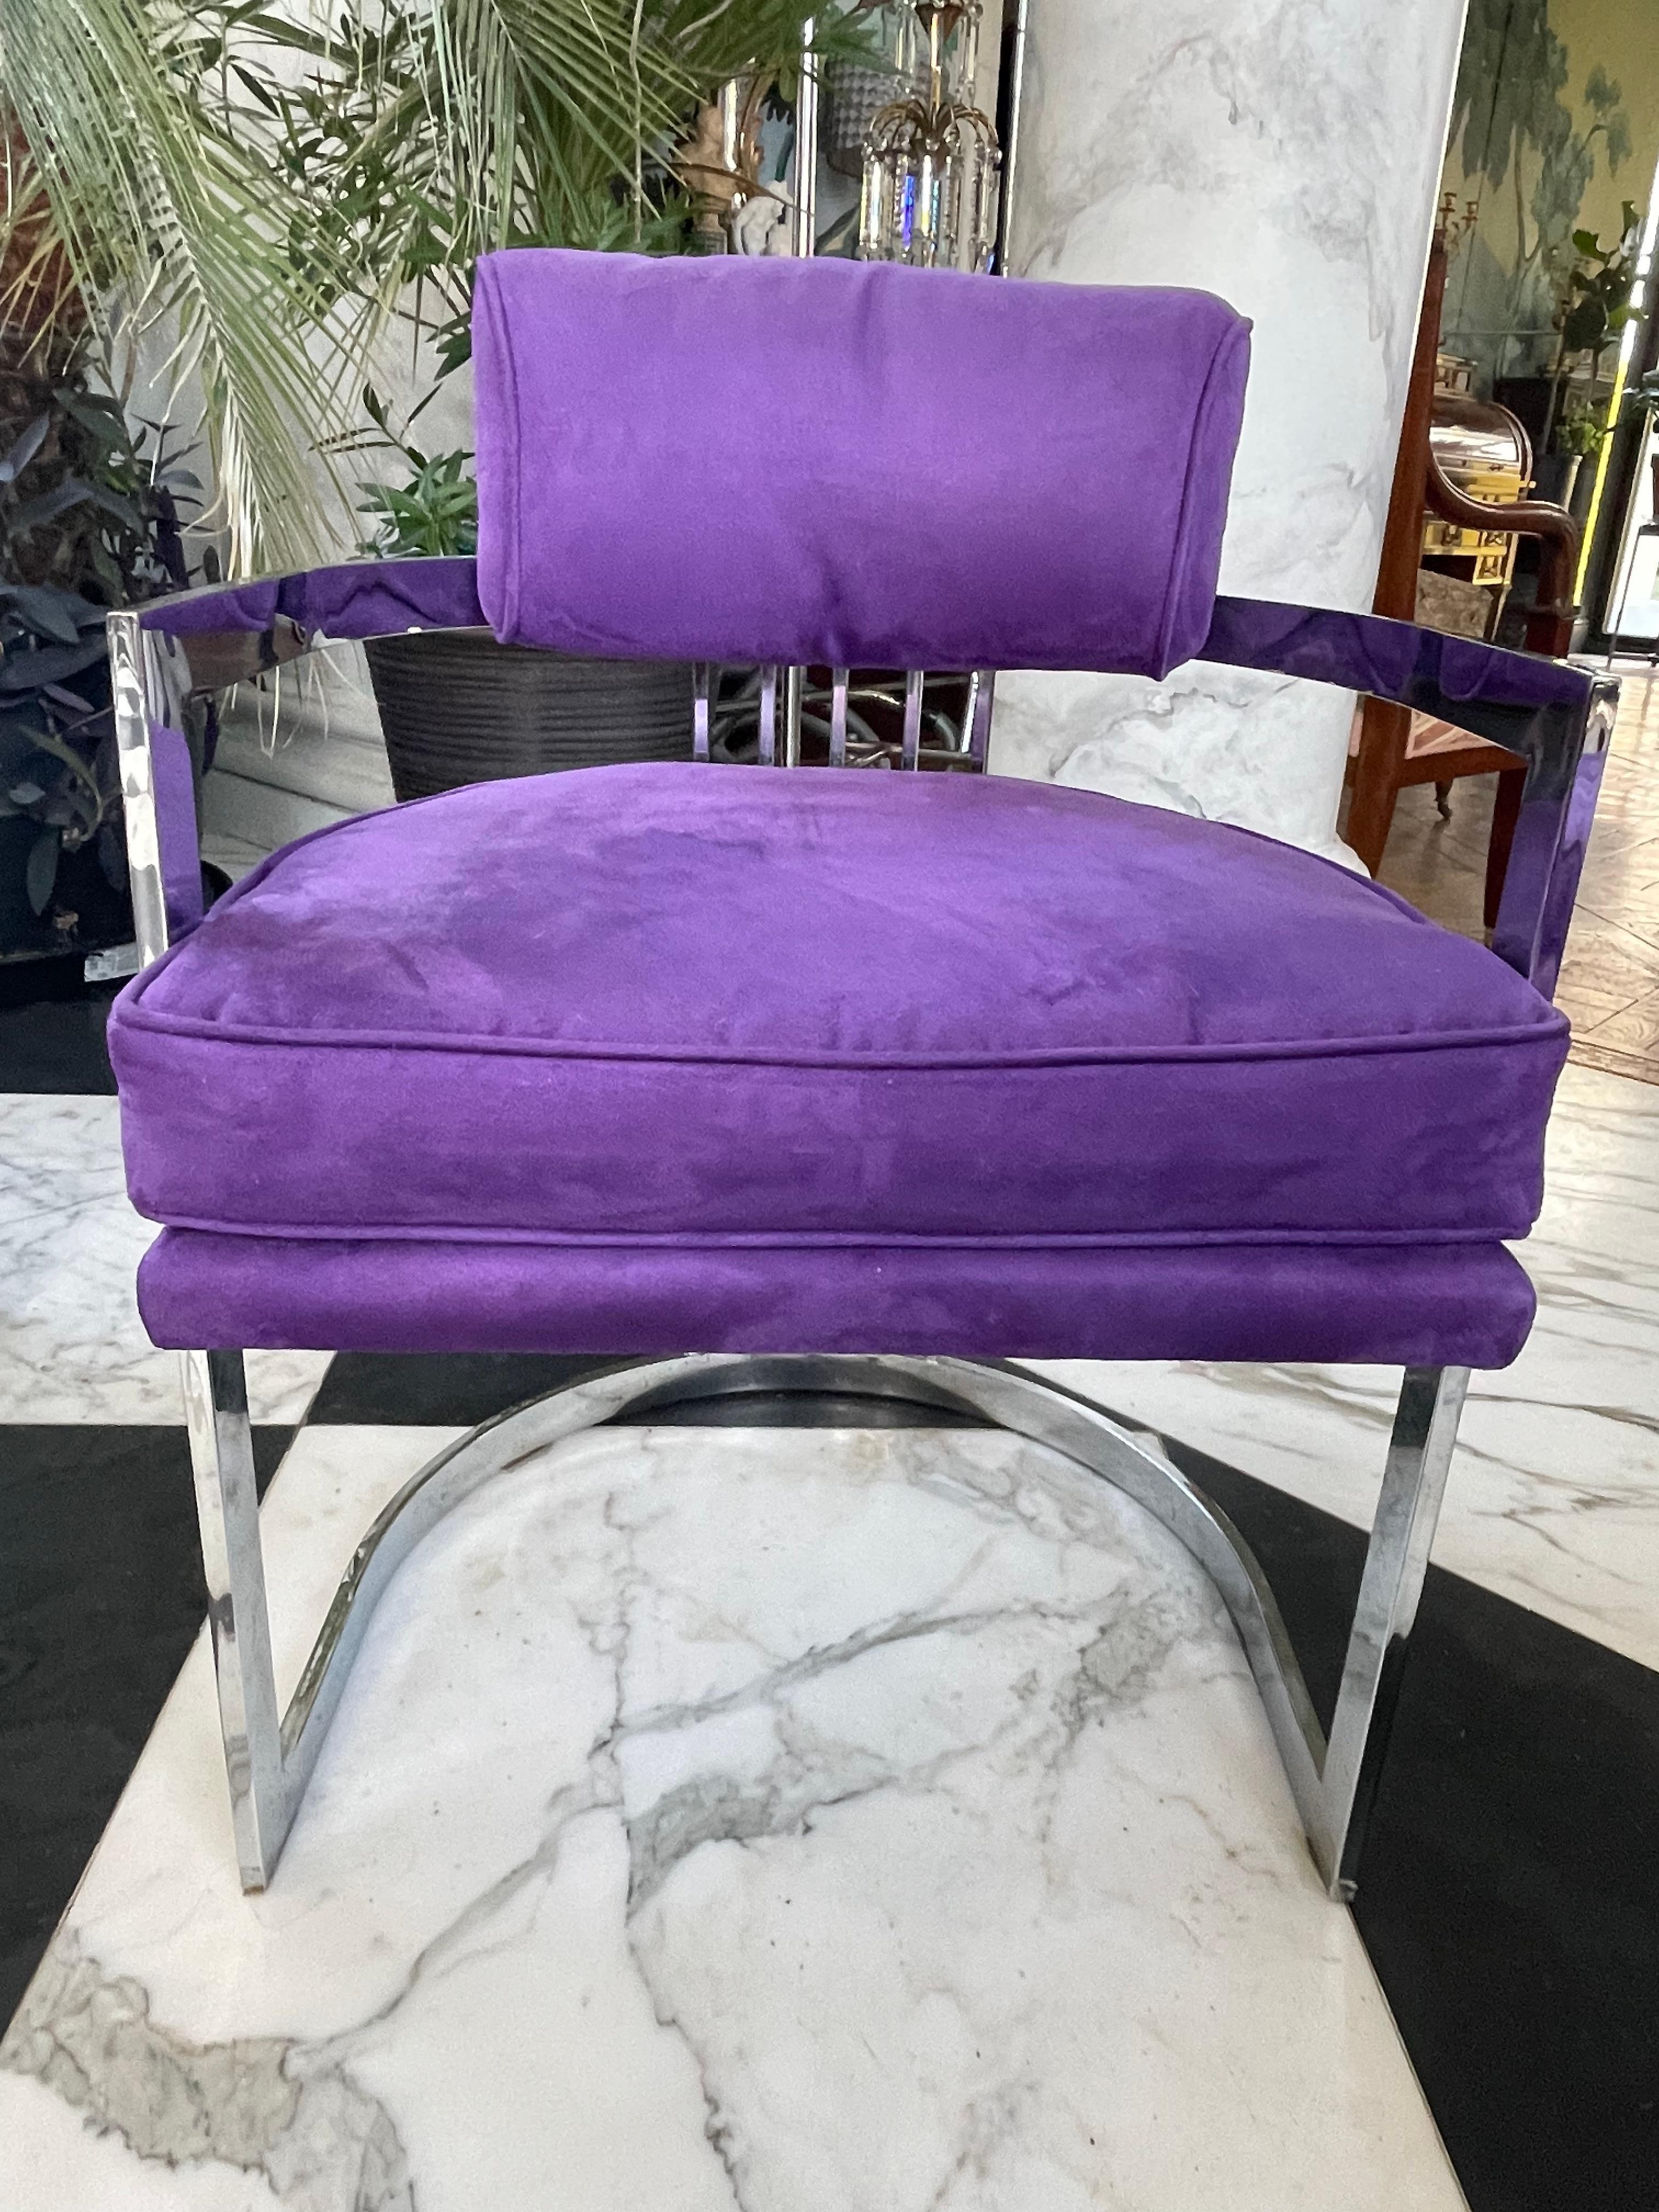 4 Milo Baughman Chrome Chairs in Purple Upholstery  For Sale 3